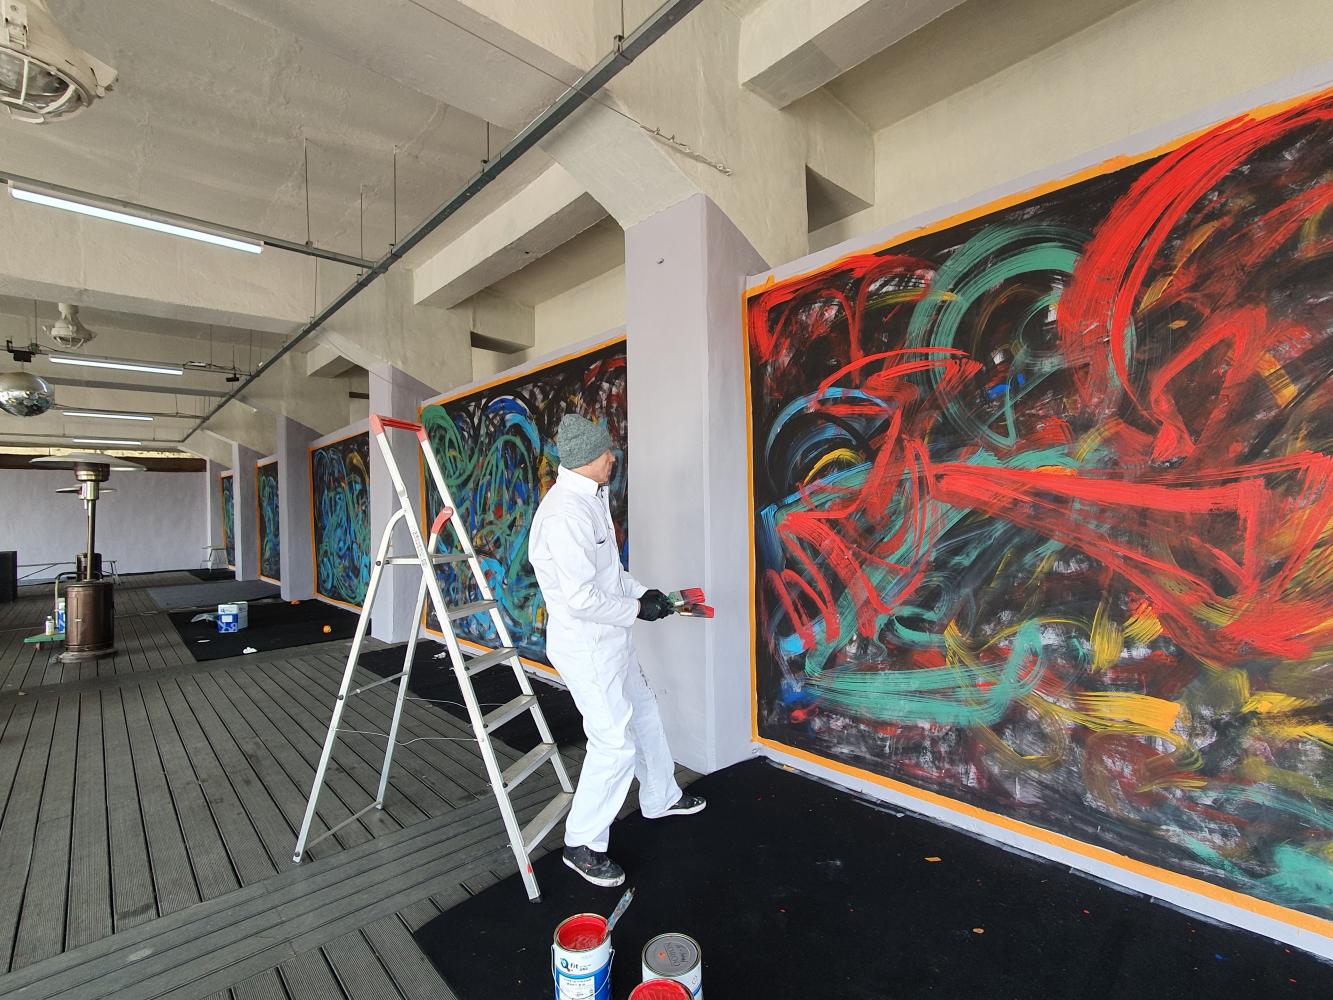 Day two of the mural, December 18th, 2019